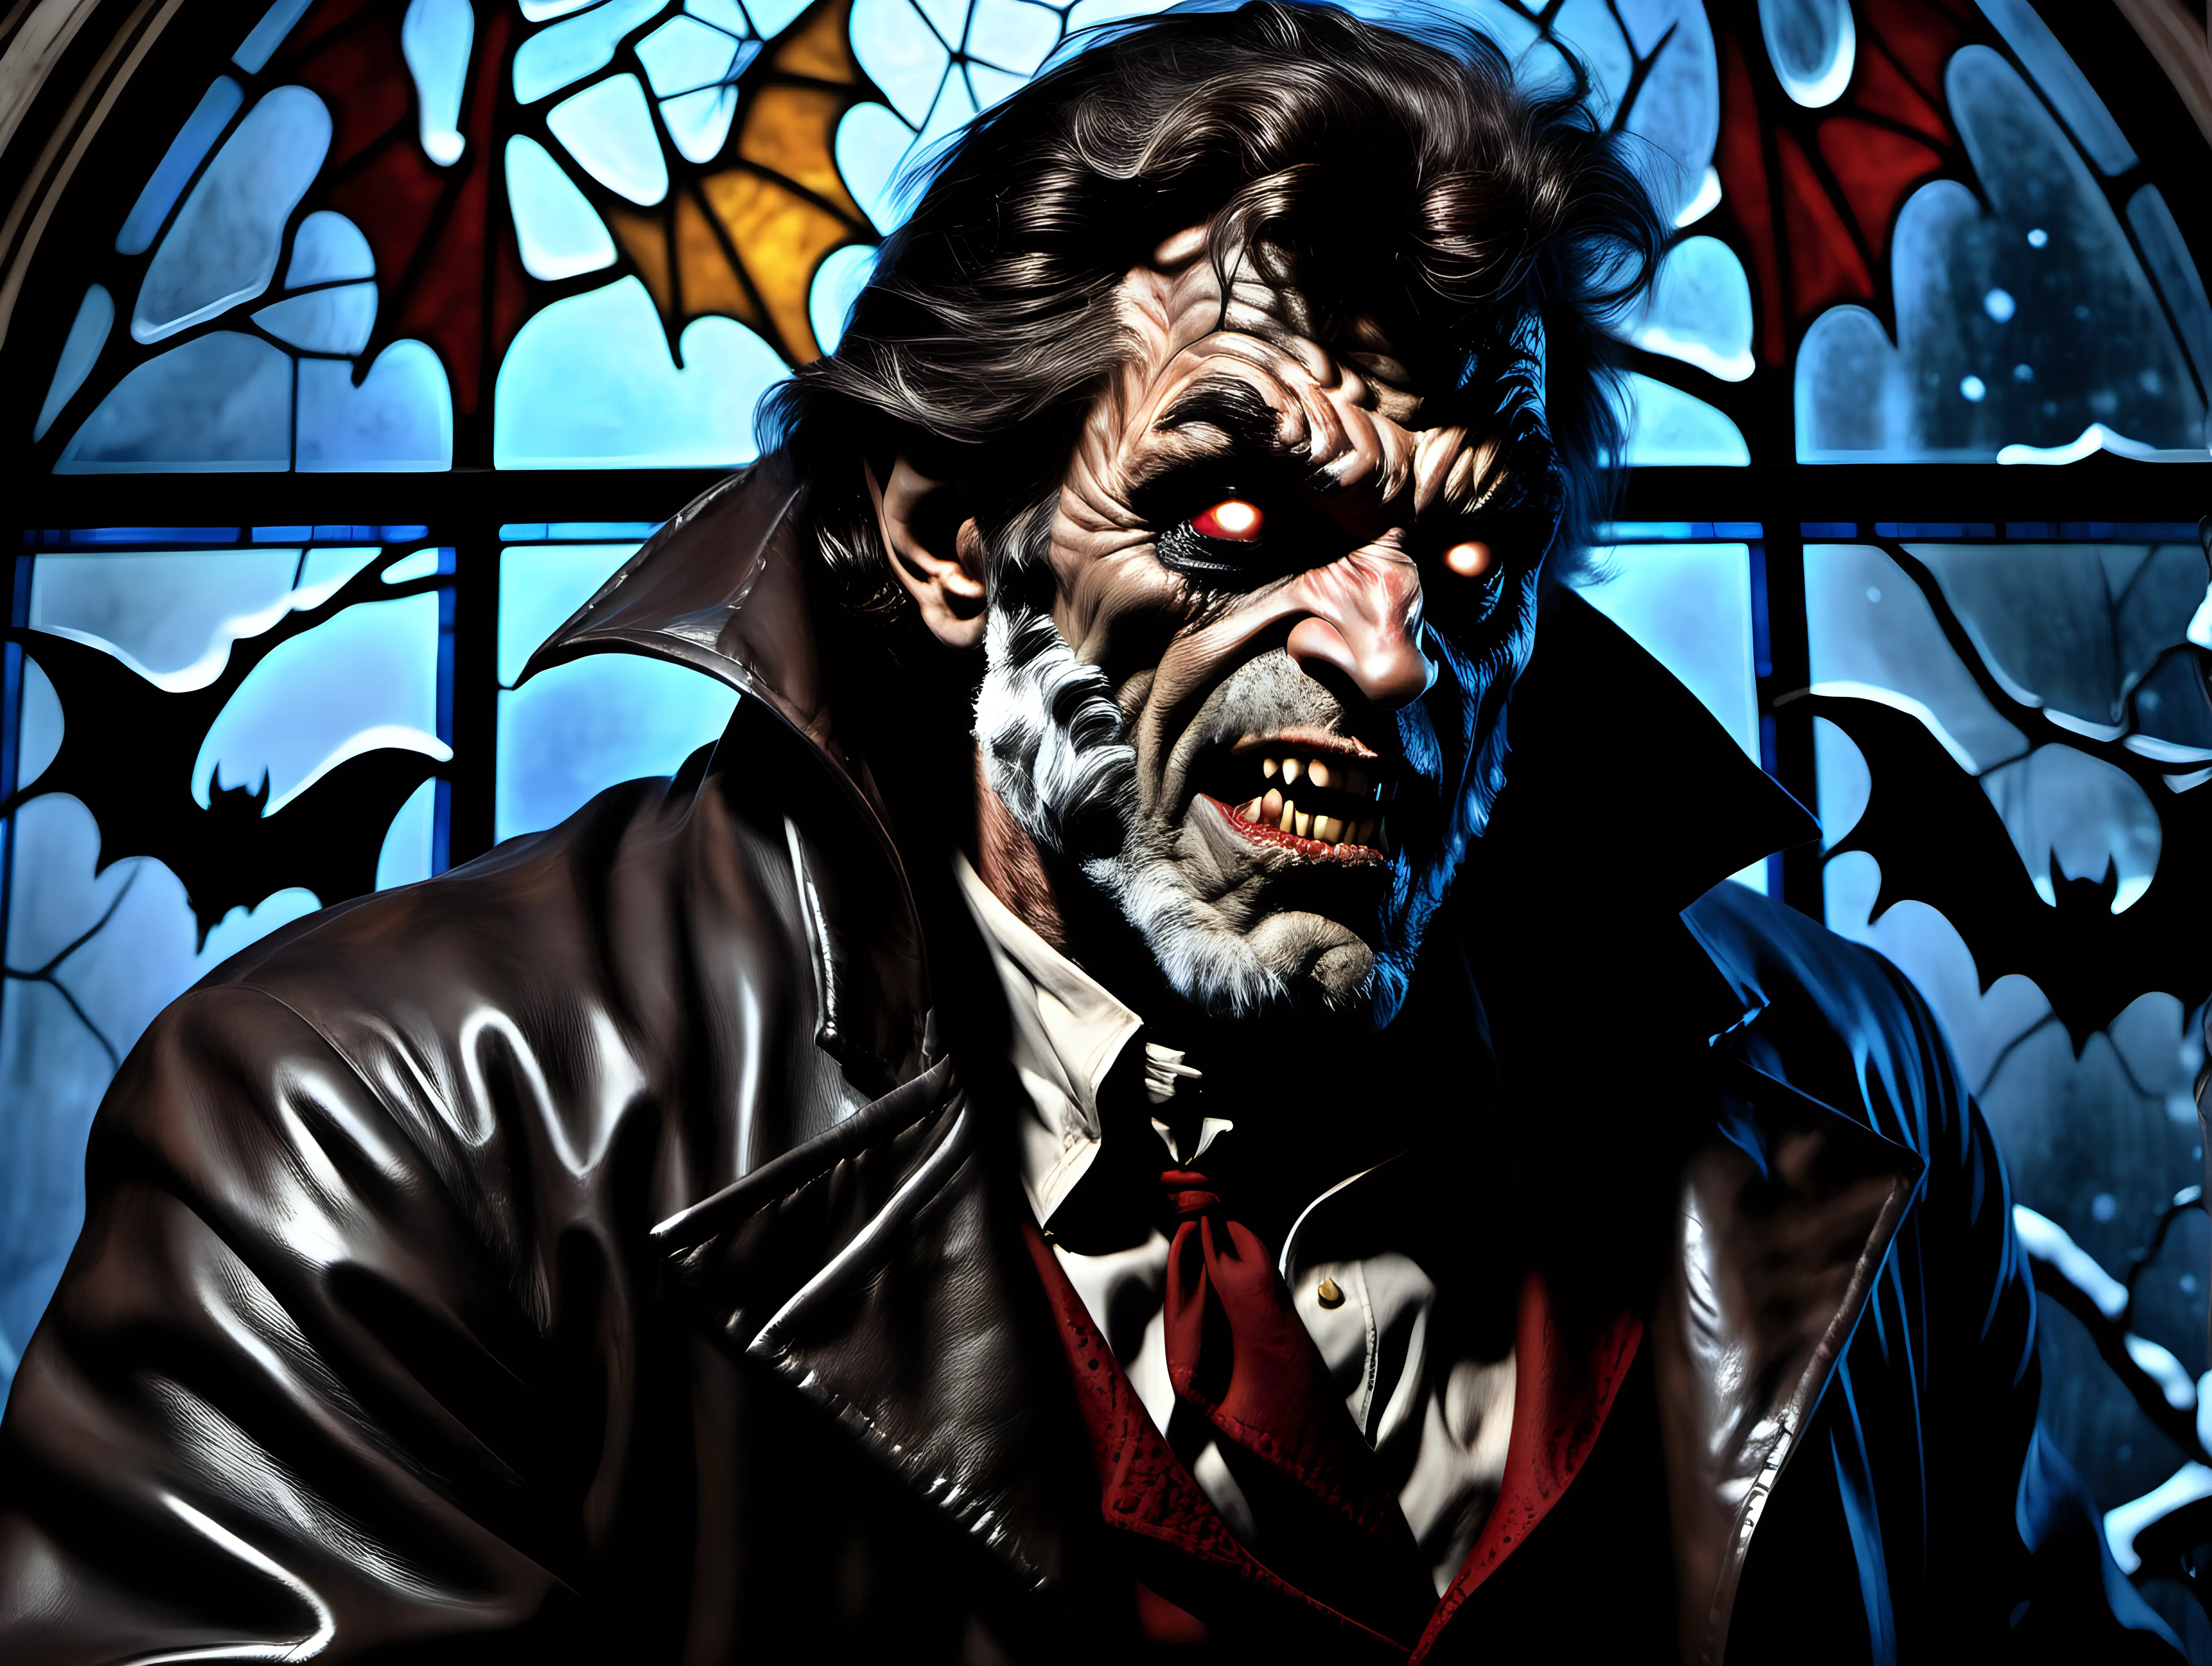 The Wolfman in front of a stained glass window with vampire bats outside in winter Frank Frazetta style in style of photorealism by frank frazetta, action photography, extremely detailed, awesome, extreme close-up shot